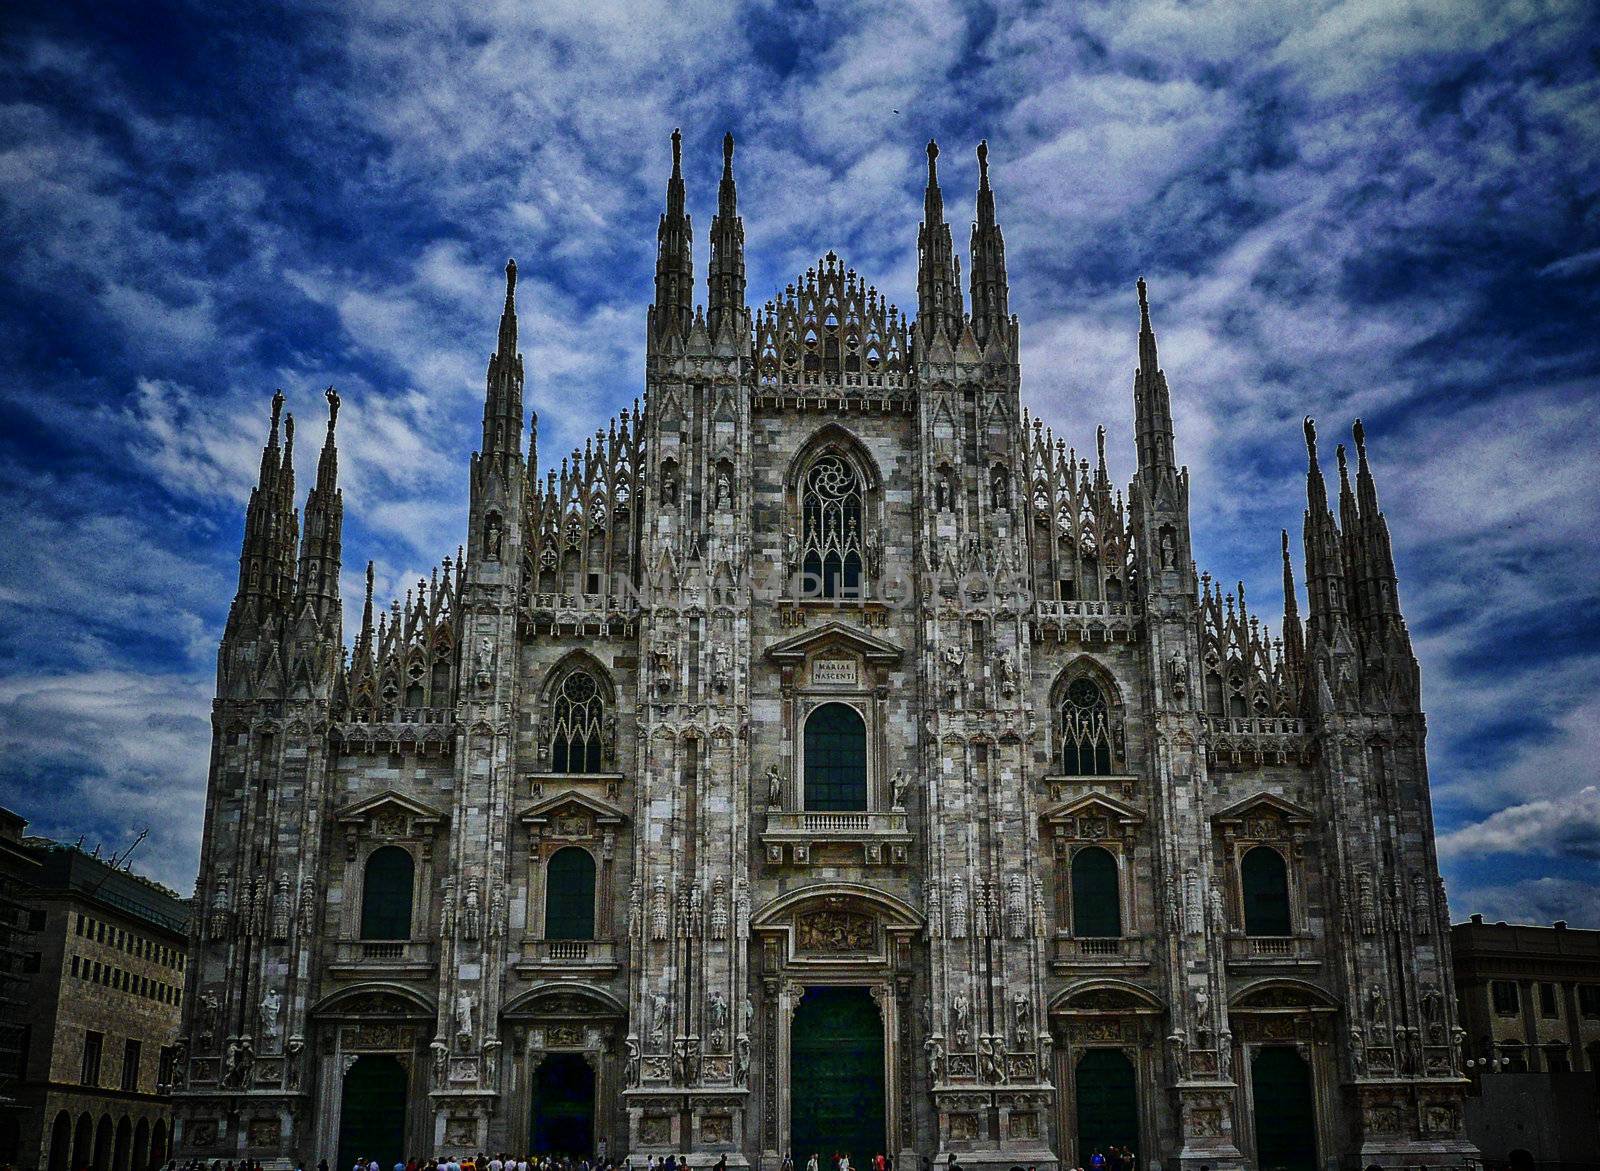 Milan Cathedral against a scenic cloudy sky, Italy by marcorubino